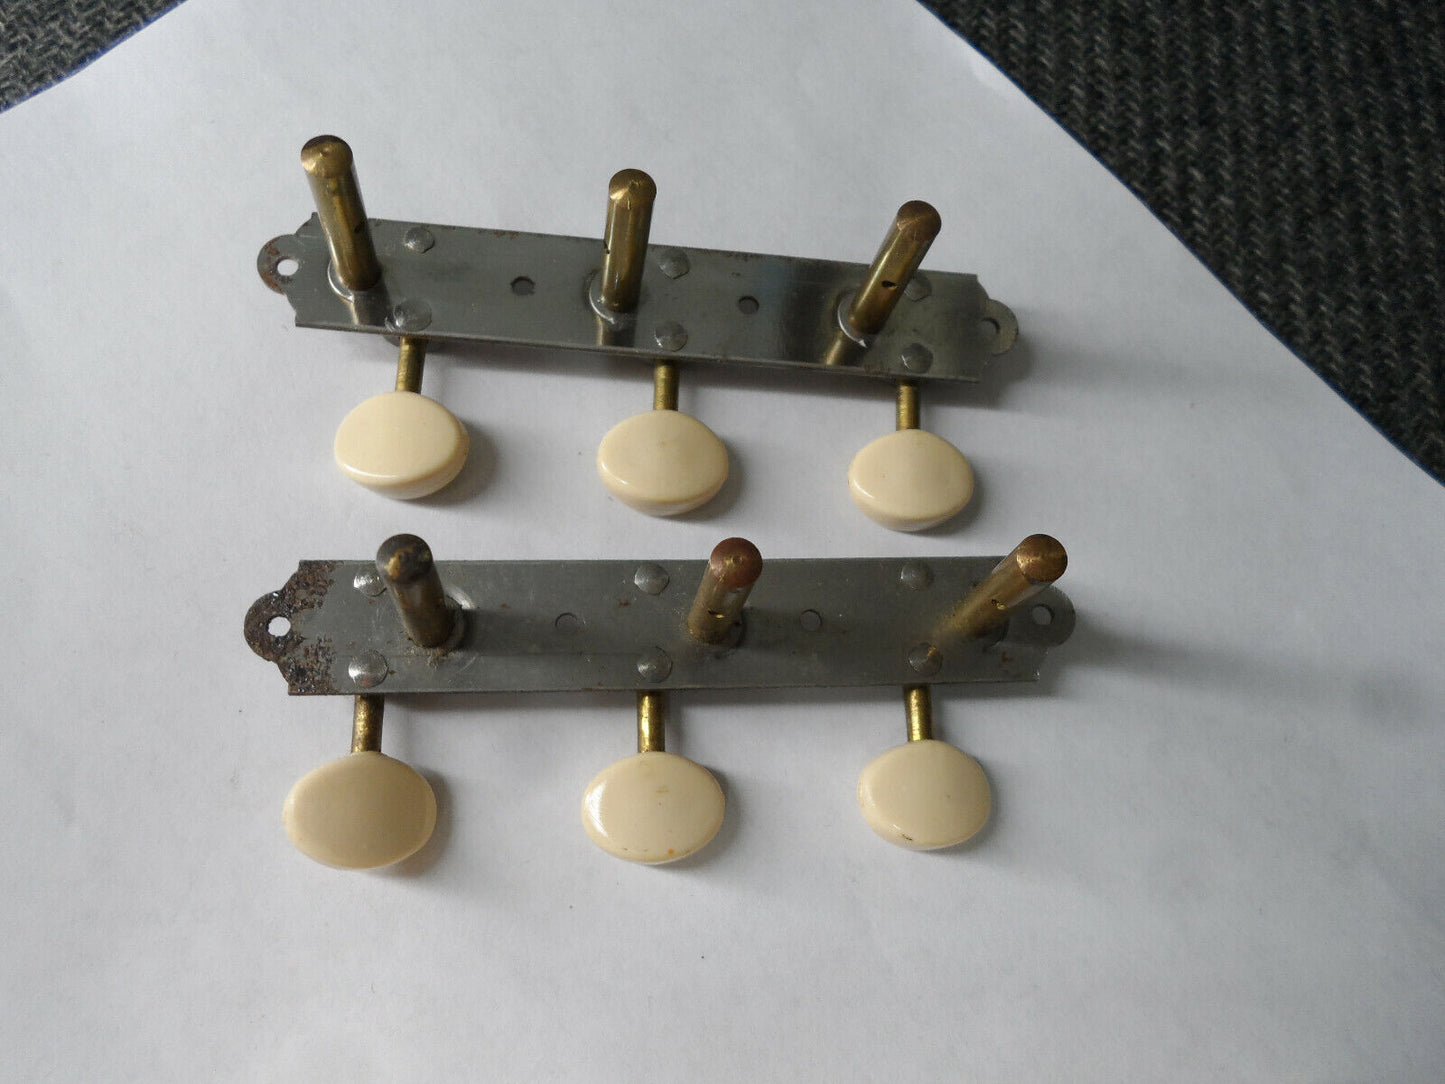 NOS 1960's Waverly Gibson USA 3x3 acoustic guitar tuners - Harmony tuning pegs